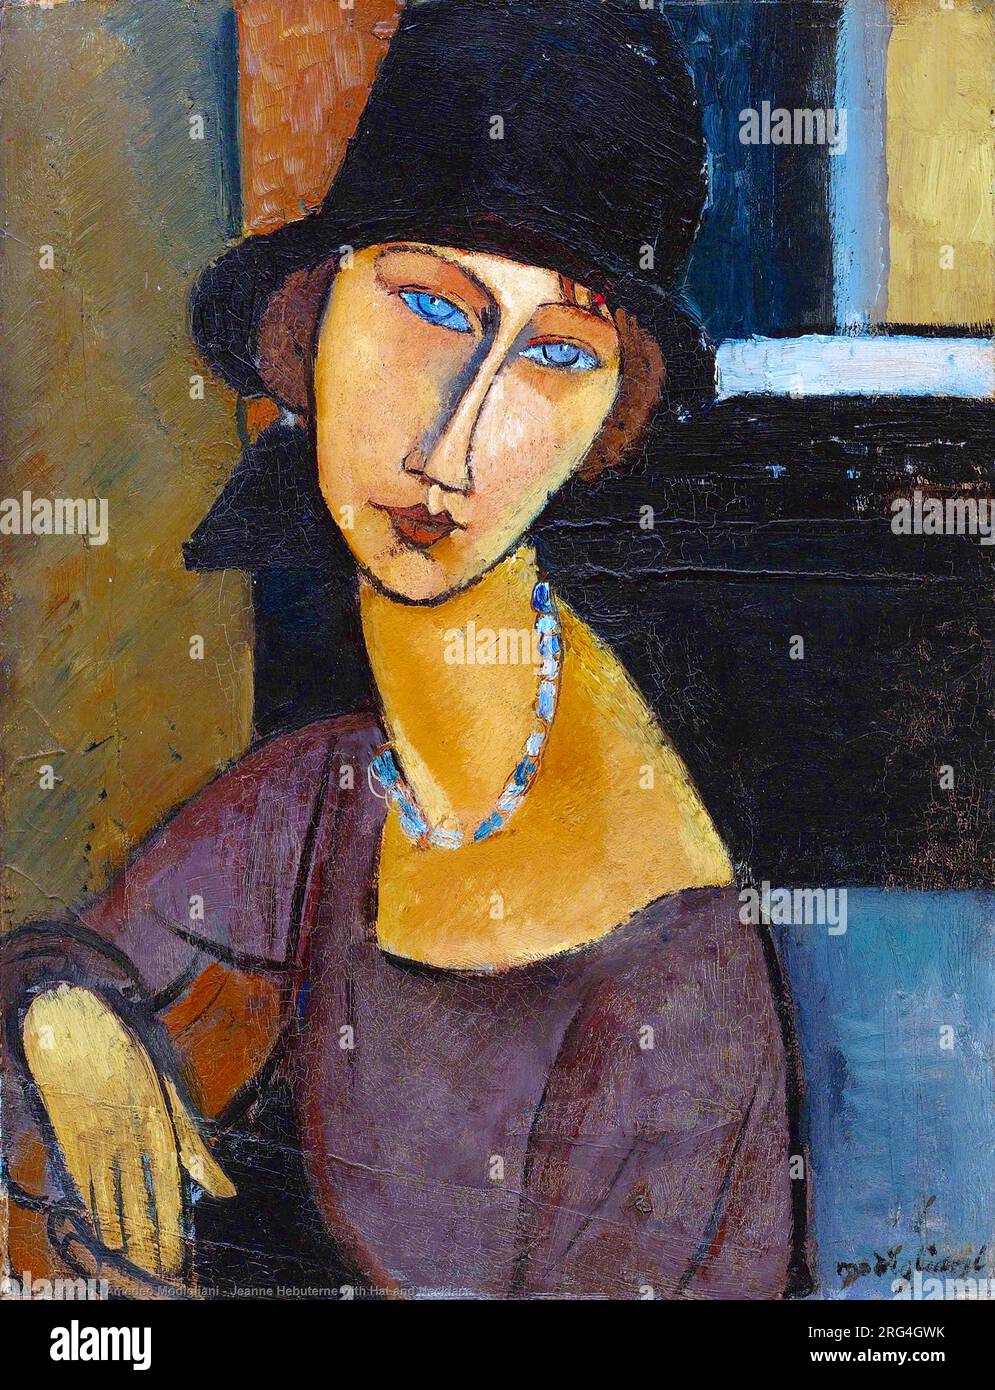 Amedeo Modigliani - Jeanne Hébuterne with Hat and Necklace - 1917 Stock Photo